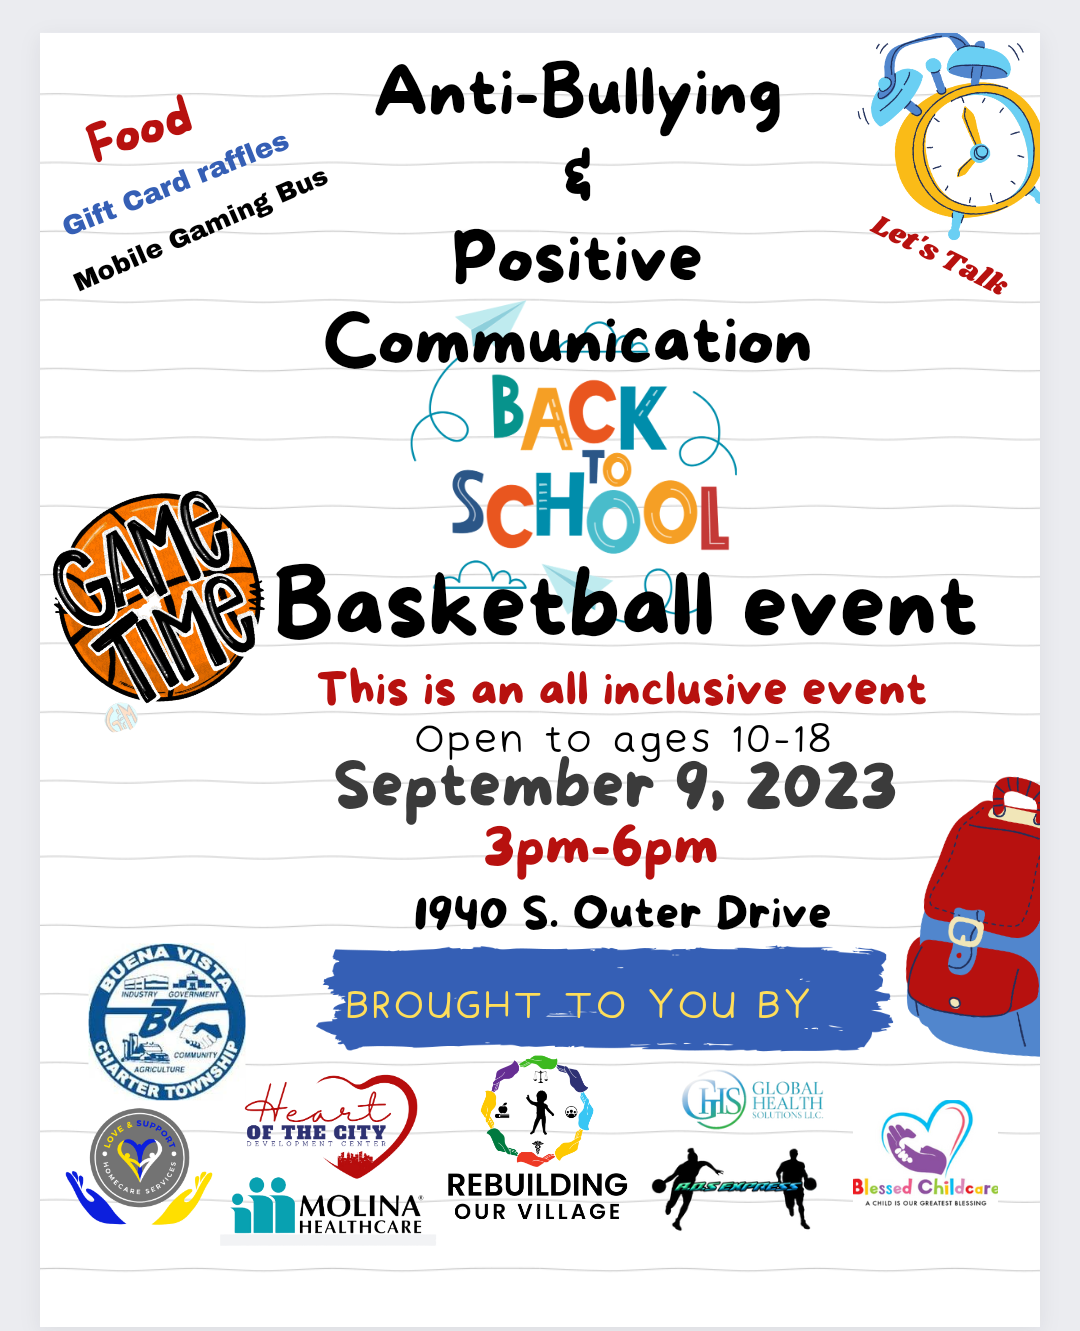 <h1 class="tribe-events-single-event-title">Anti-bullying & Positive Communication Back To School Basketball Event</h1>